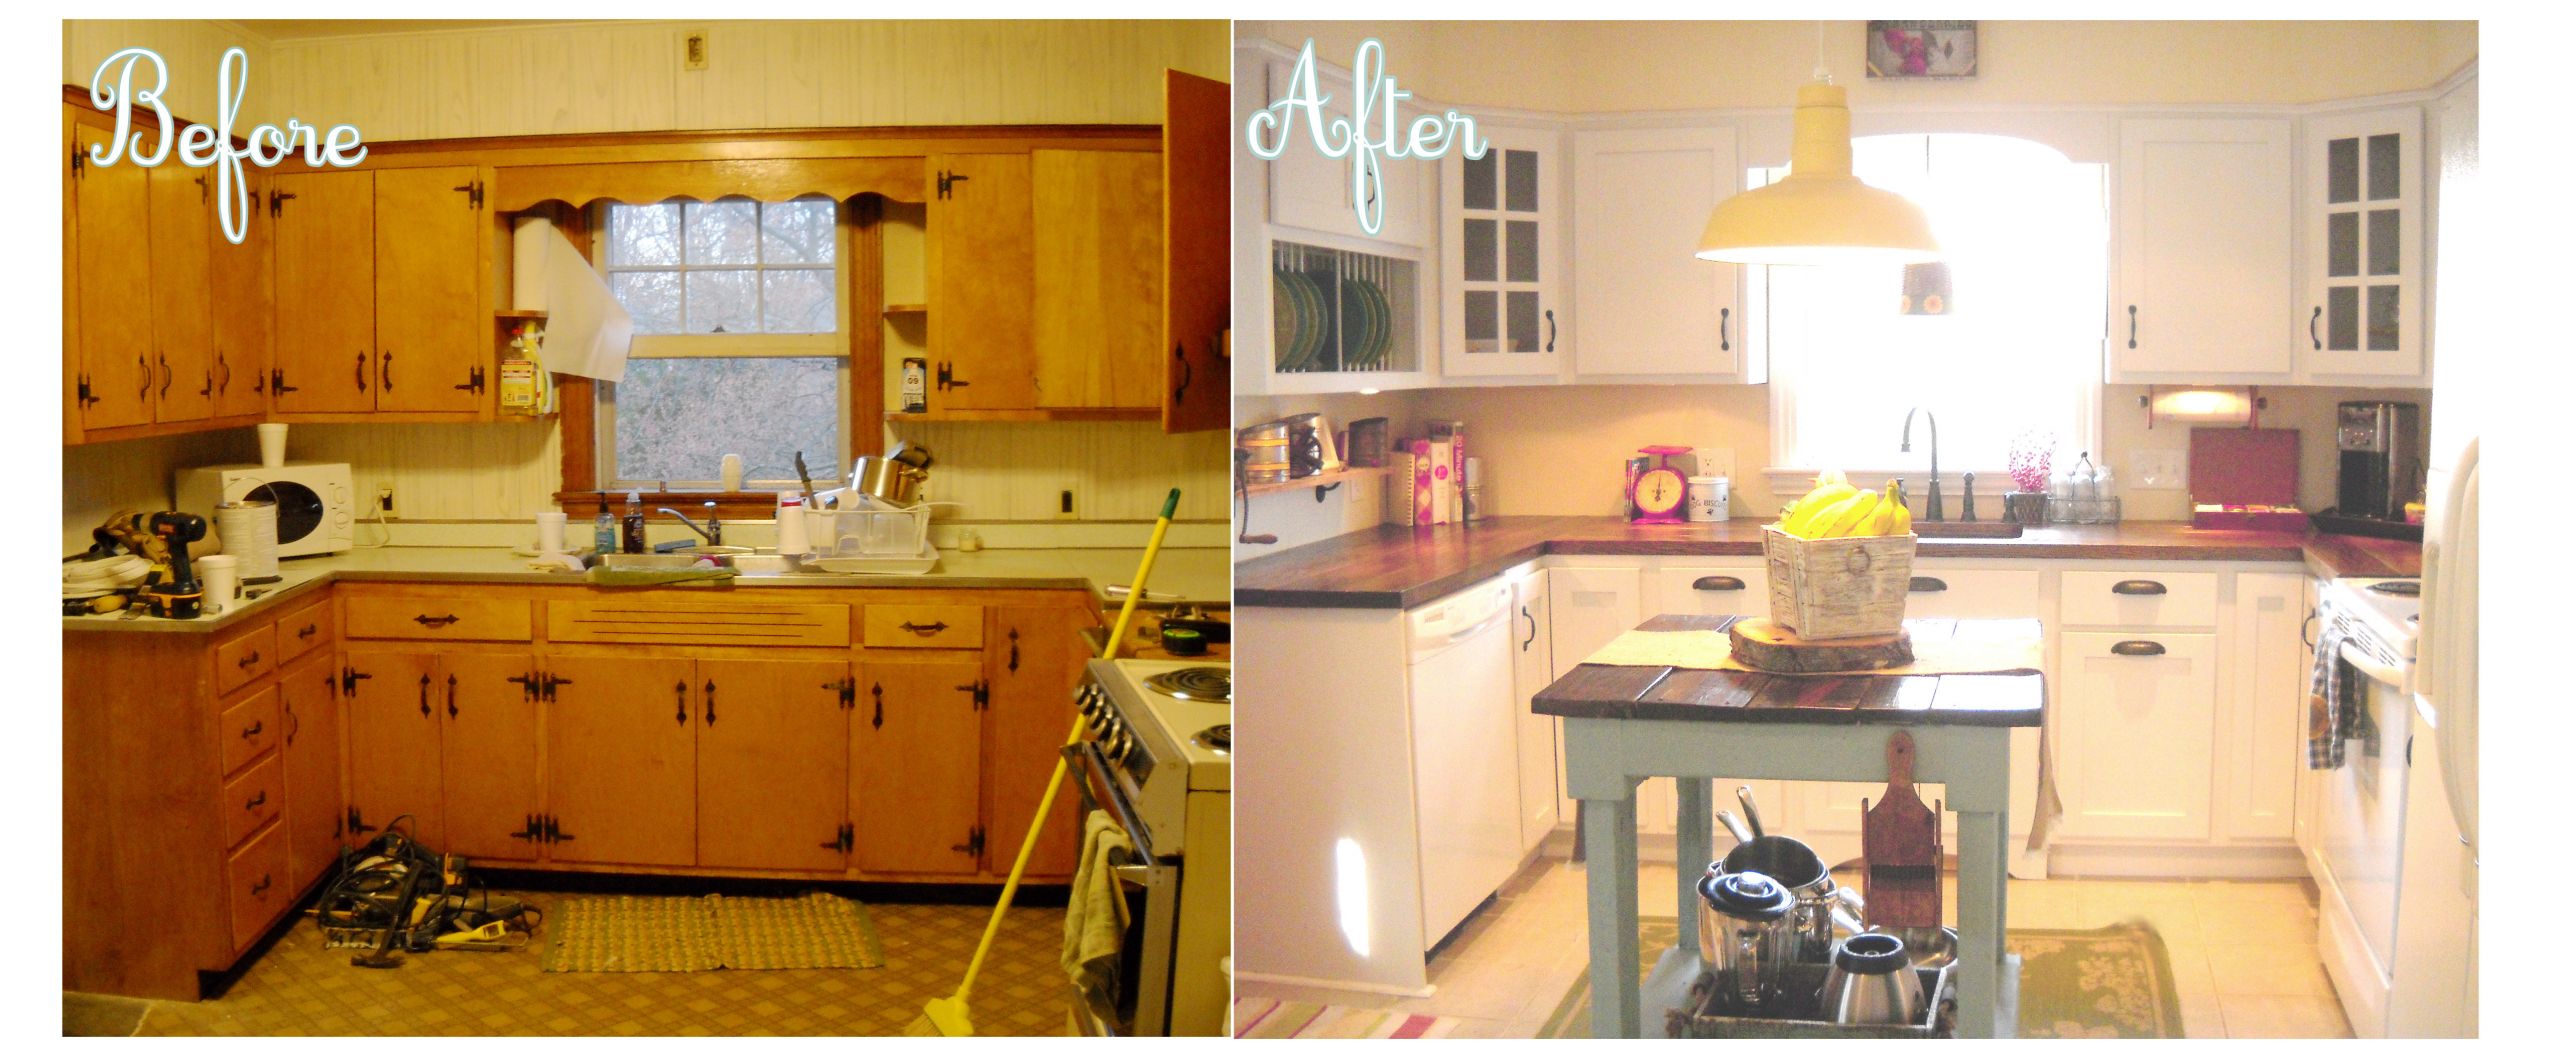 Kitchen Remodels Before And After
 Get the Fresh and Cool Outlook Inspiration with Kitchen